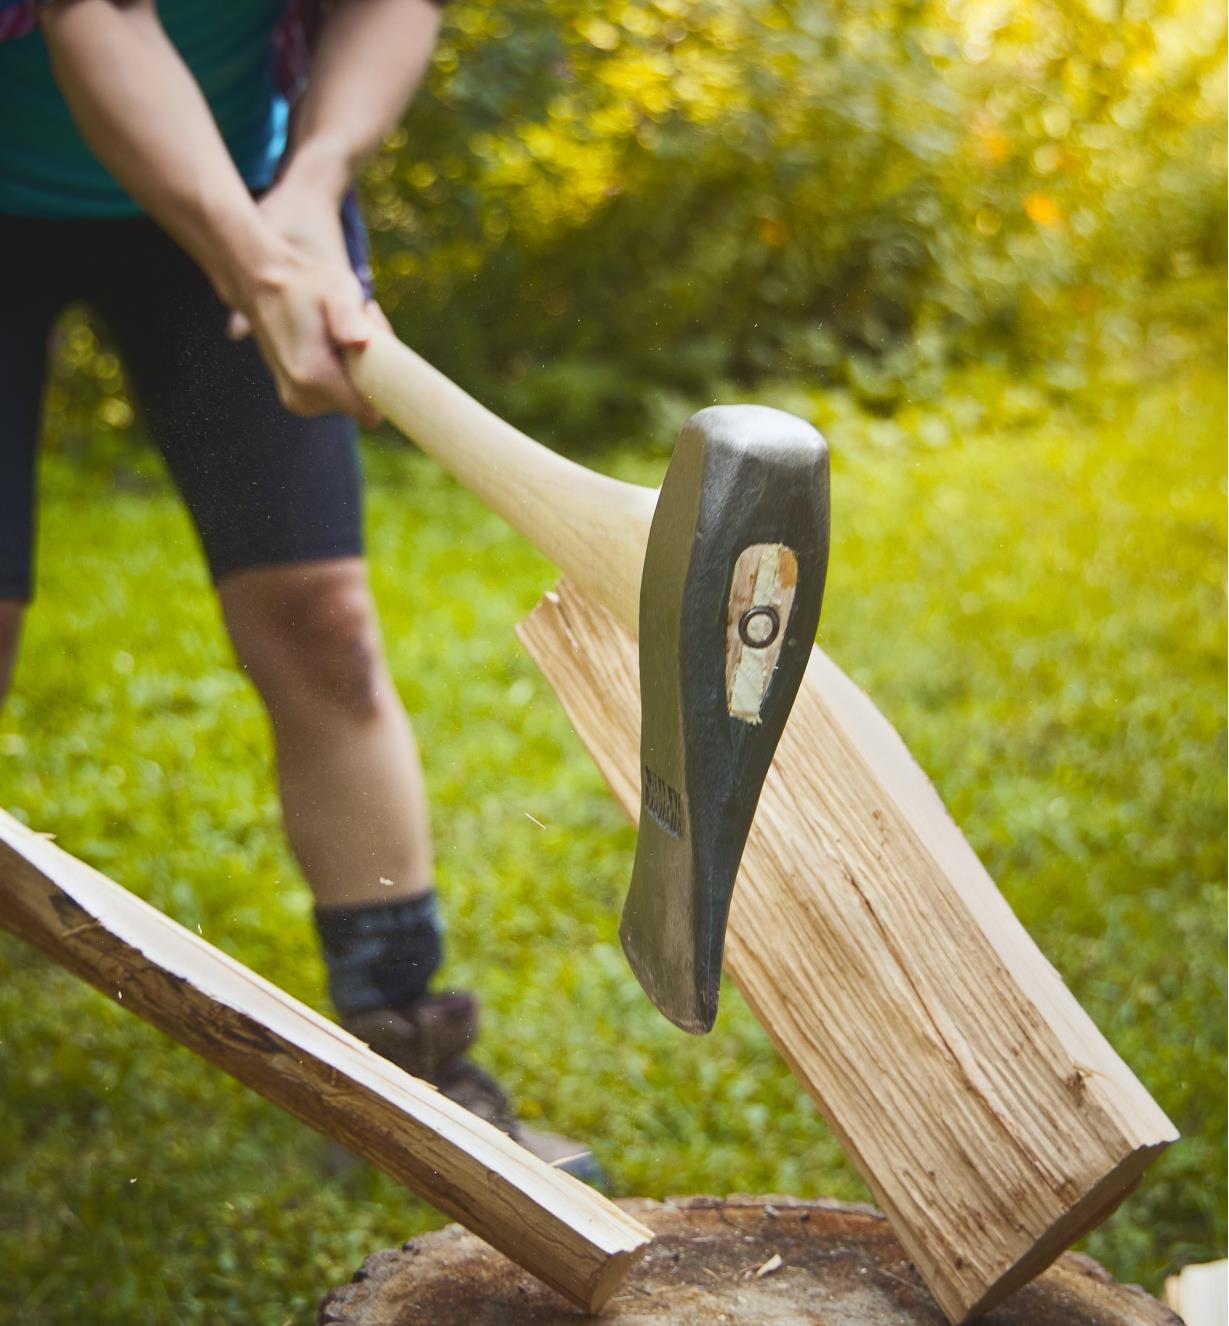 A maul being used to split wood